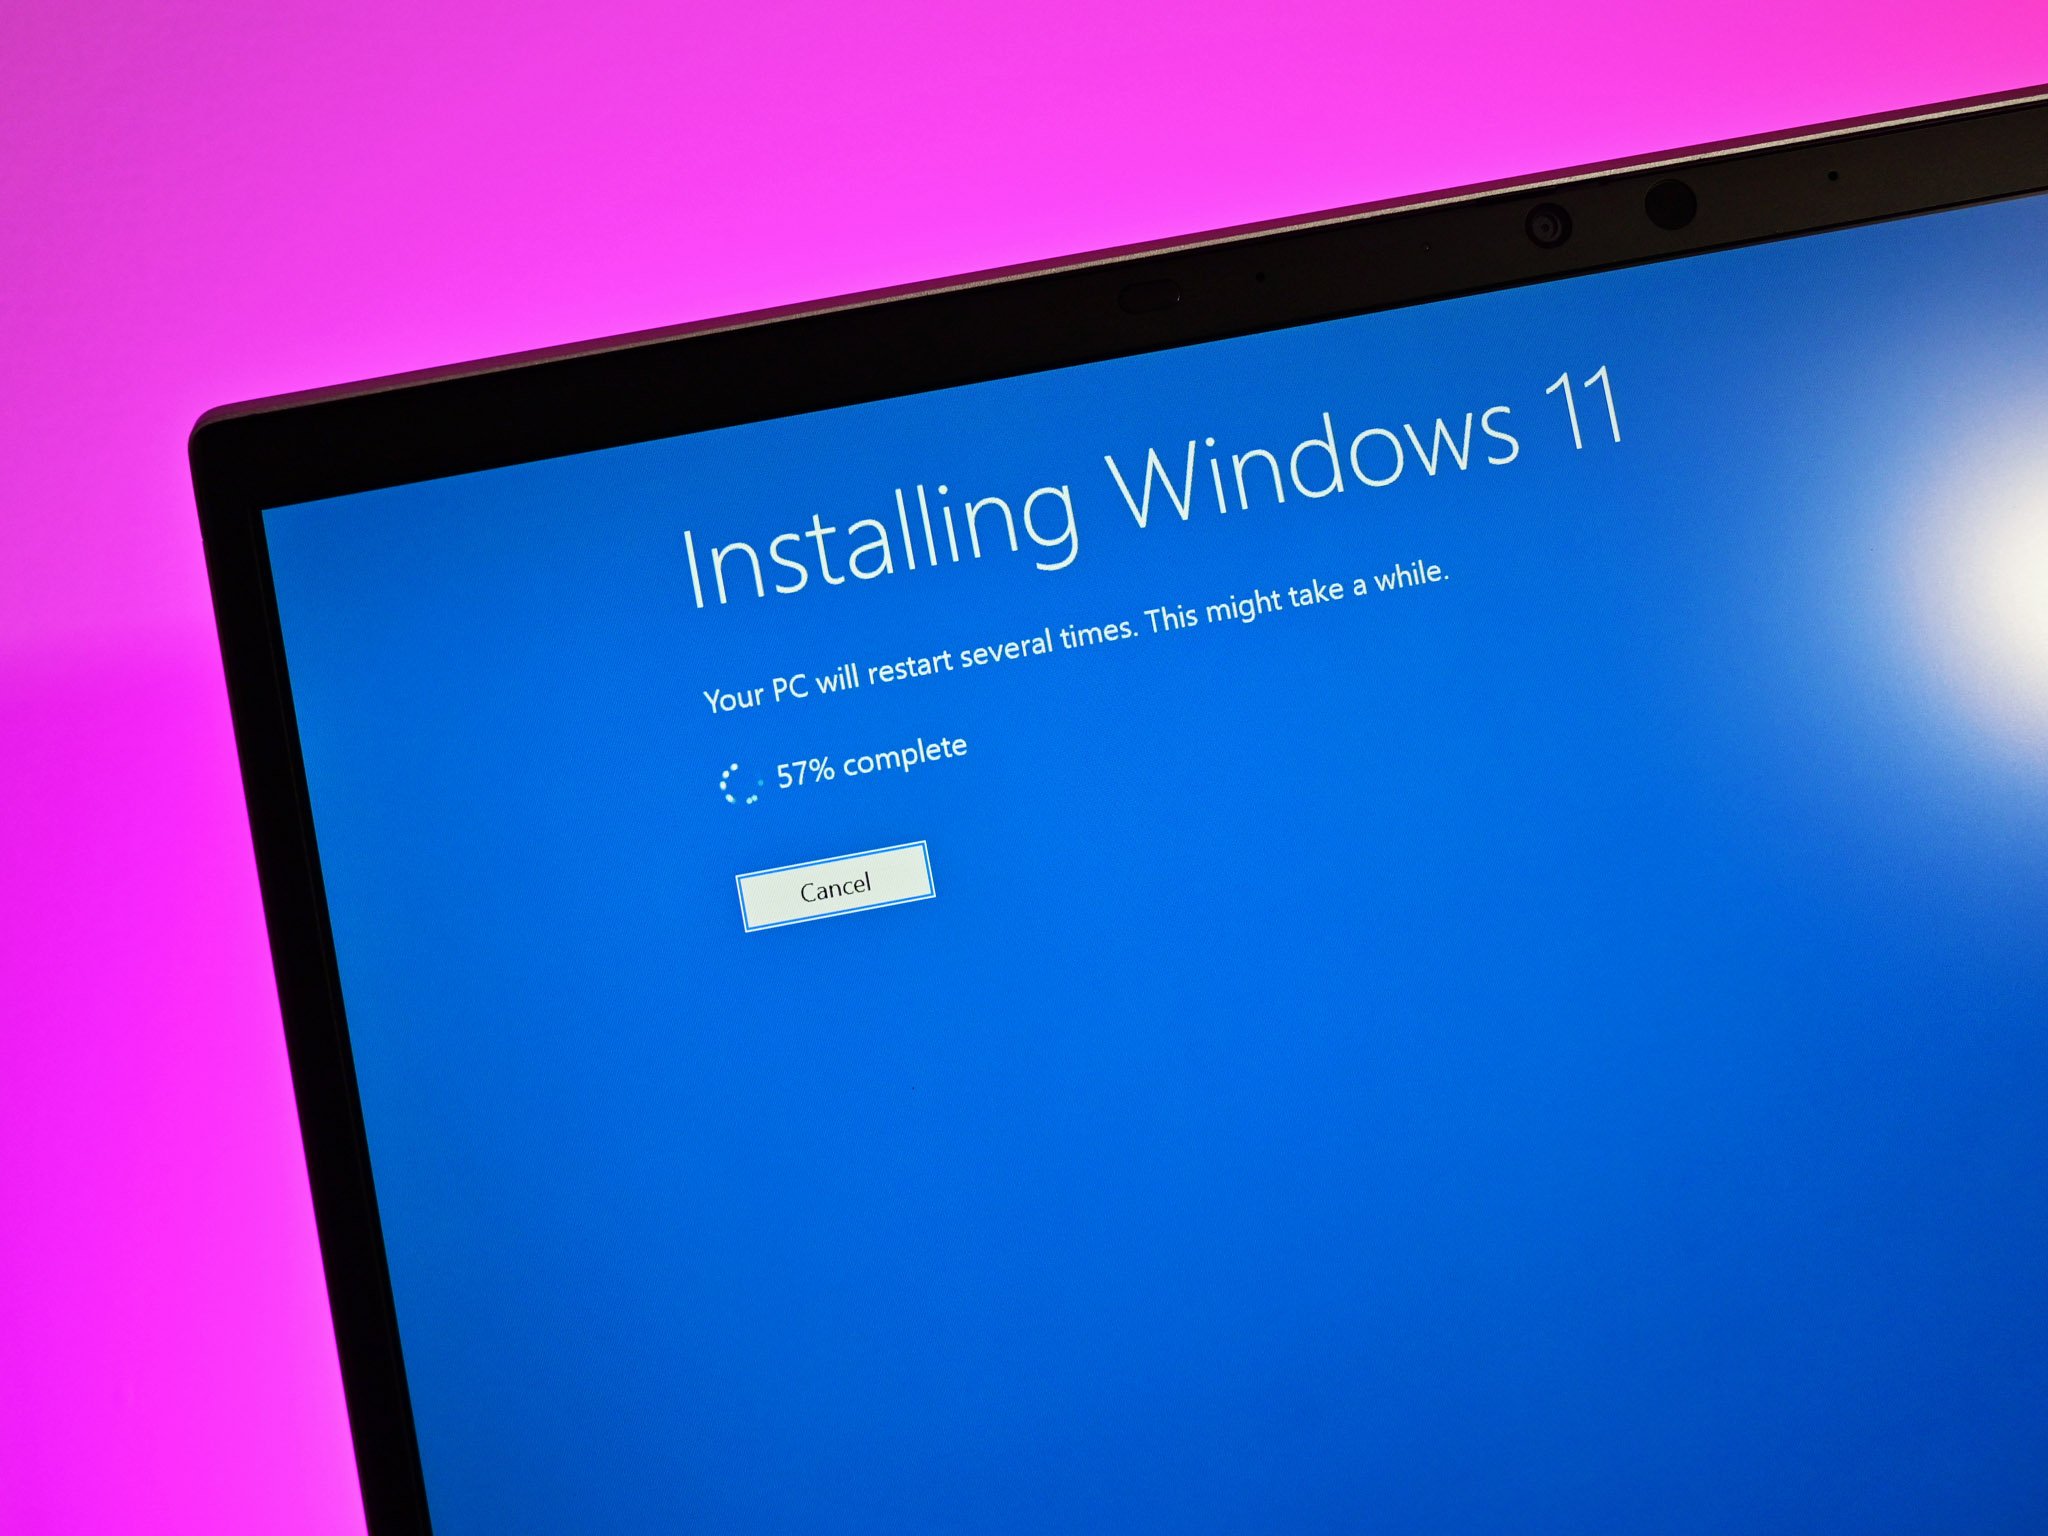 Want to install the Windows 11 Beta? Here's how you can get the